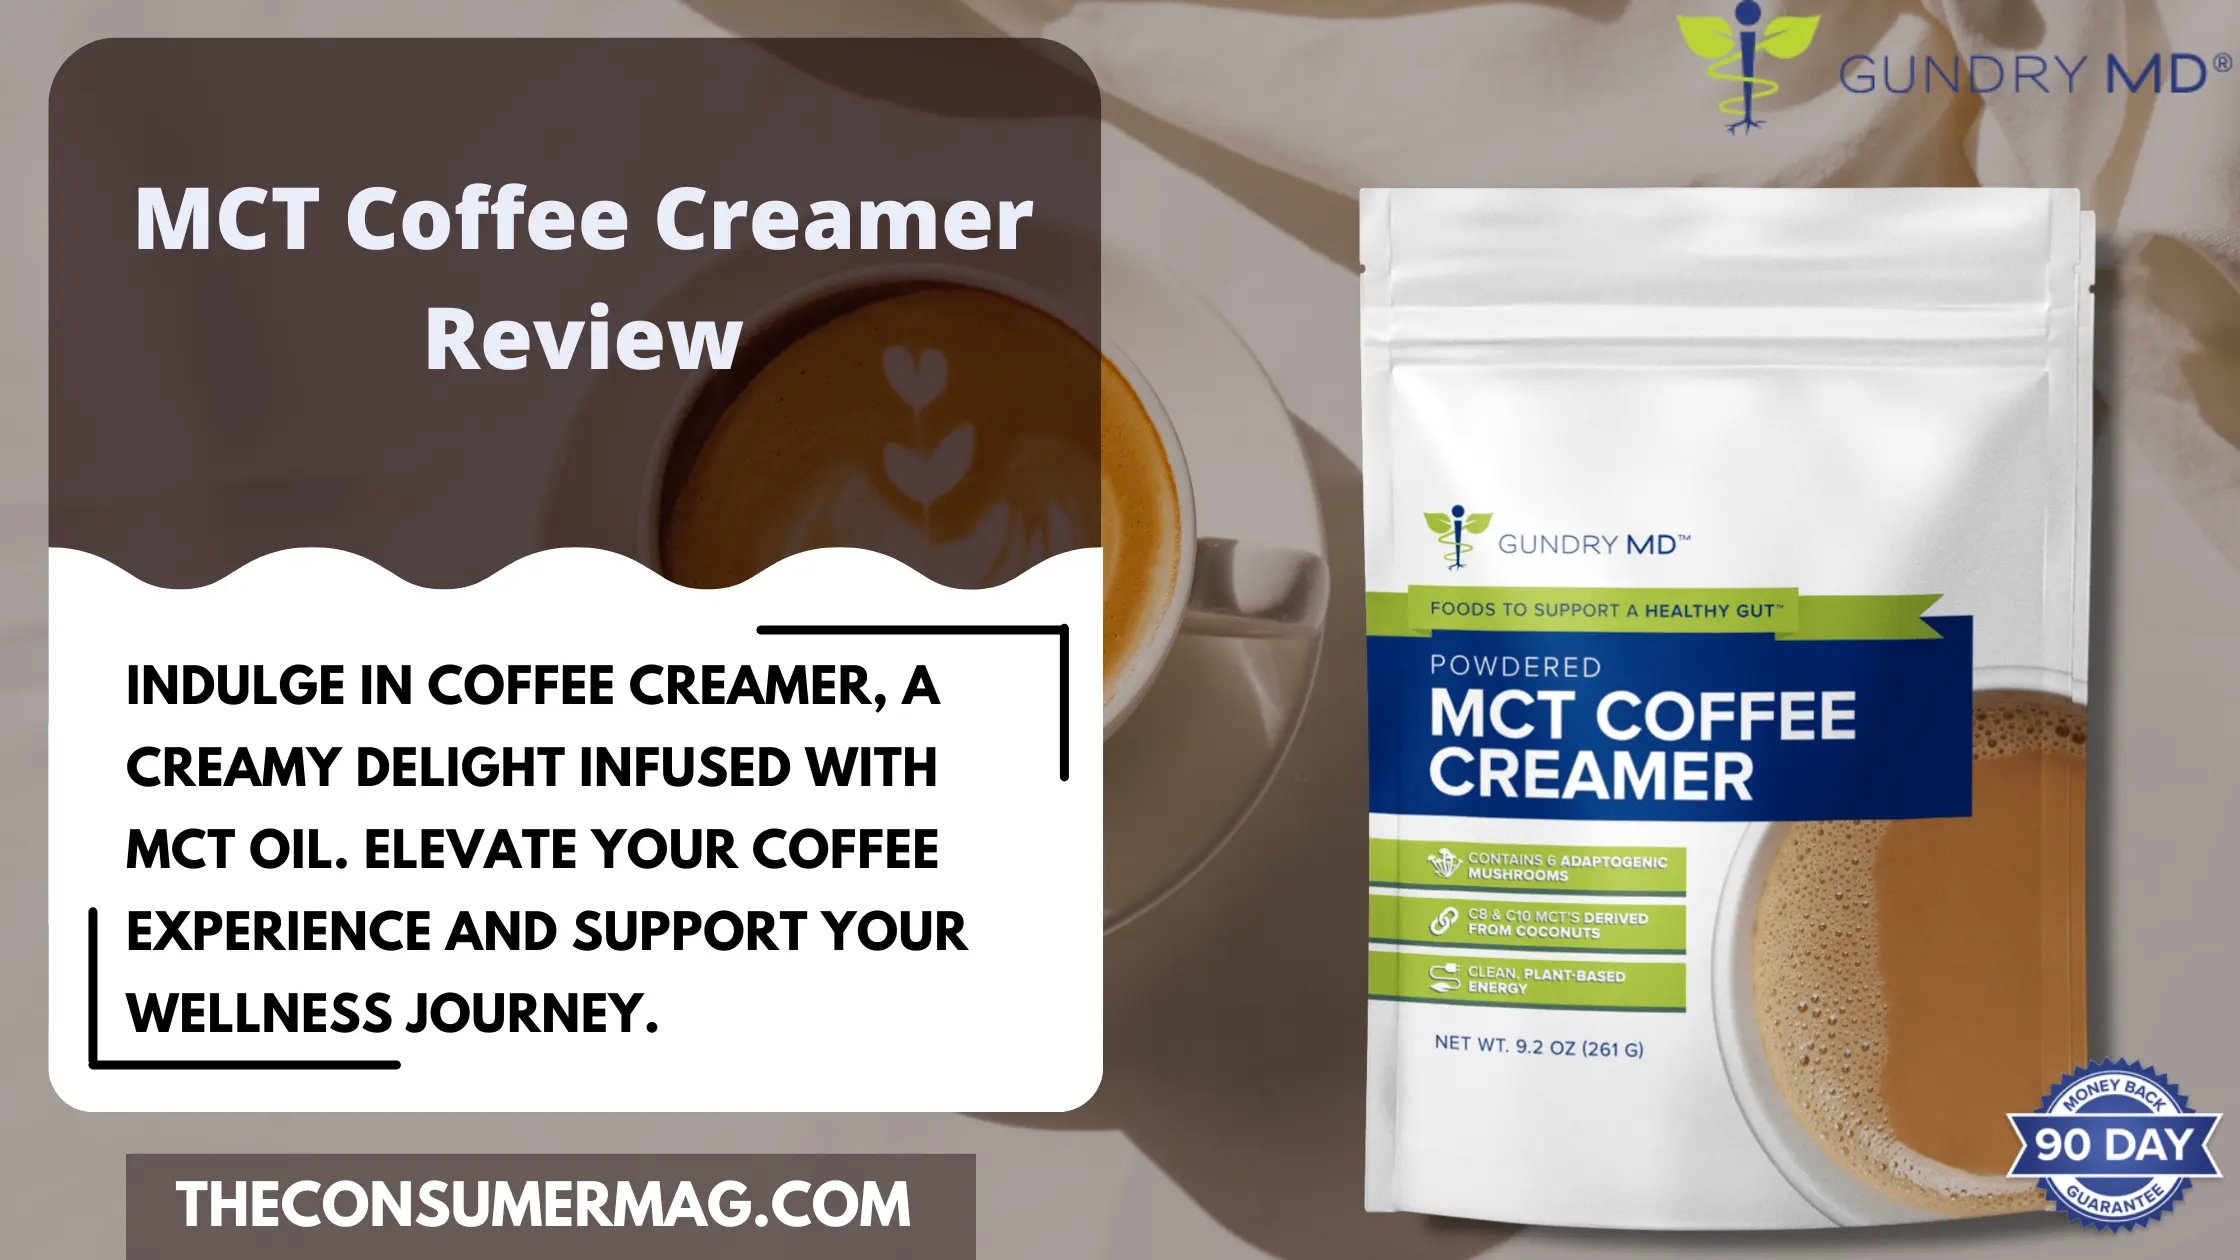 MCT Coffee Creamer Featured Image